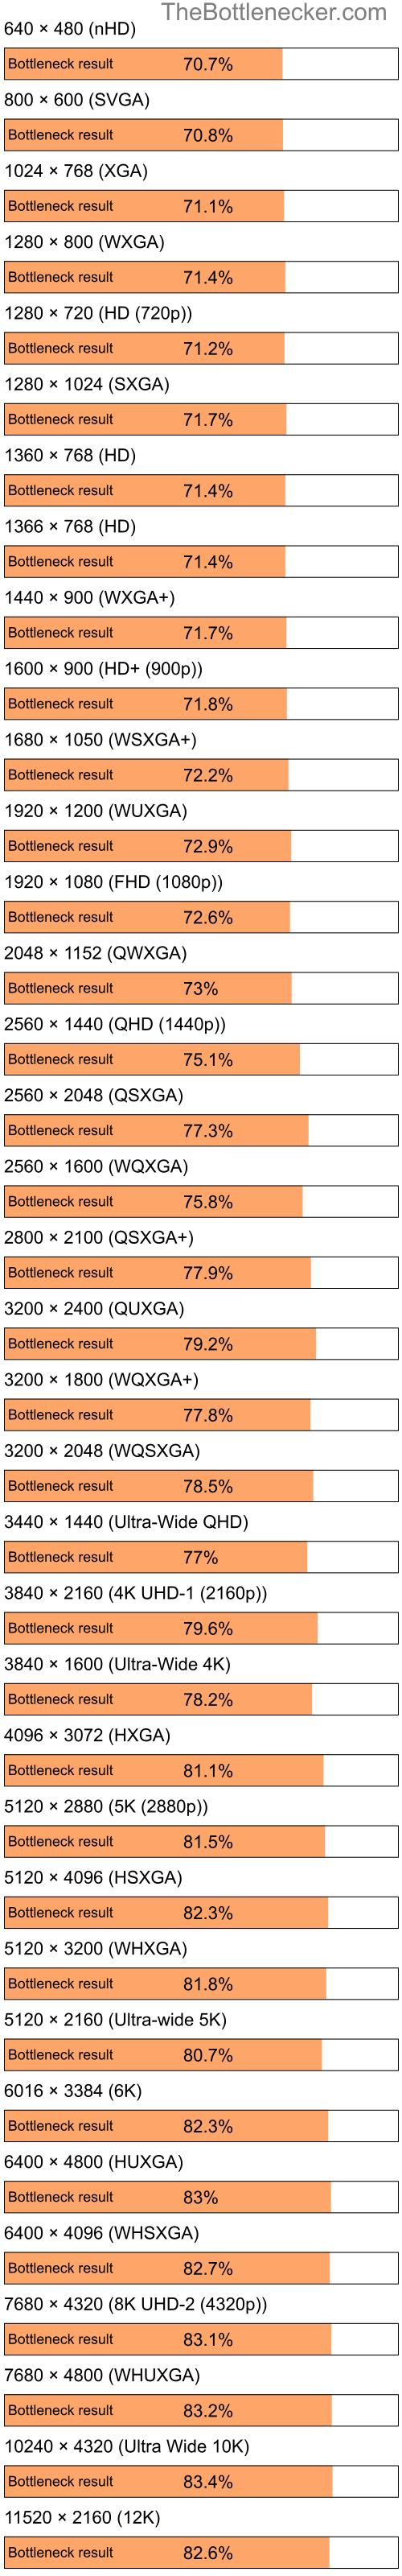 Bottleneck results by resolution for Intel Pentium 4 and NVIDIA GeForce 9300 GS in Graphic Card Intense Tasks